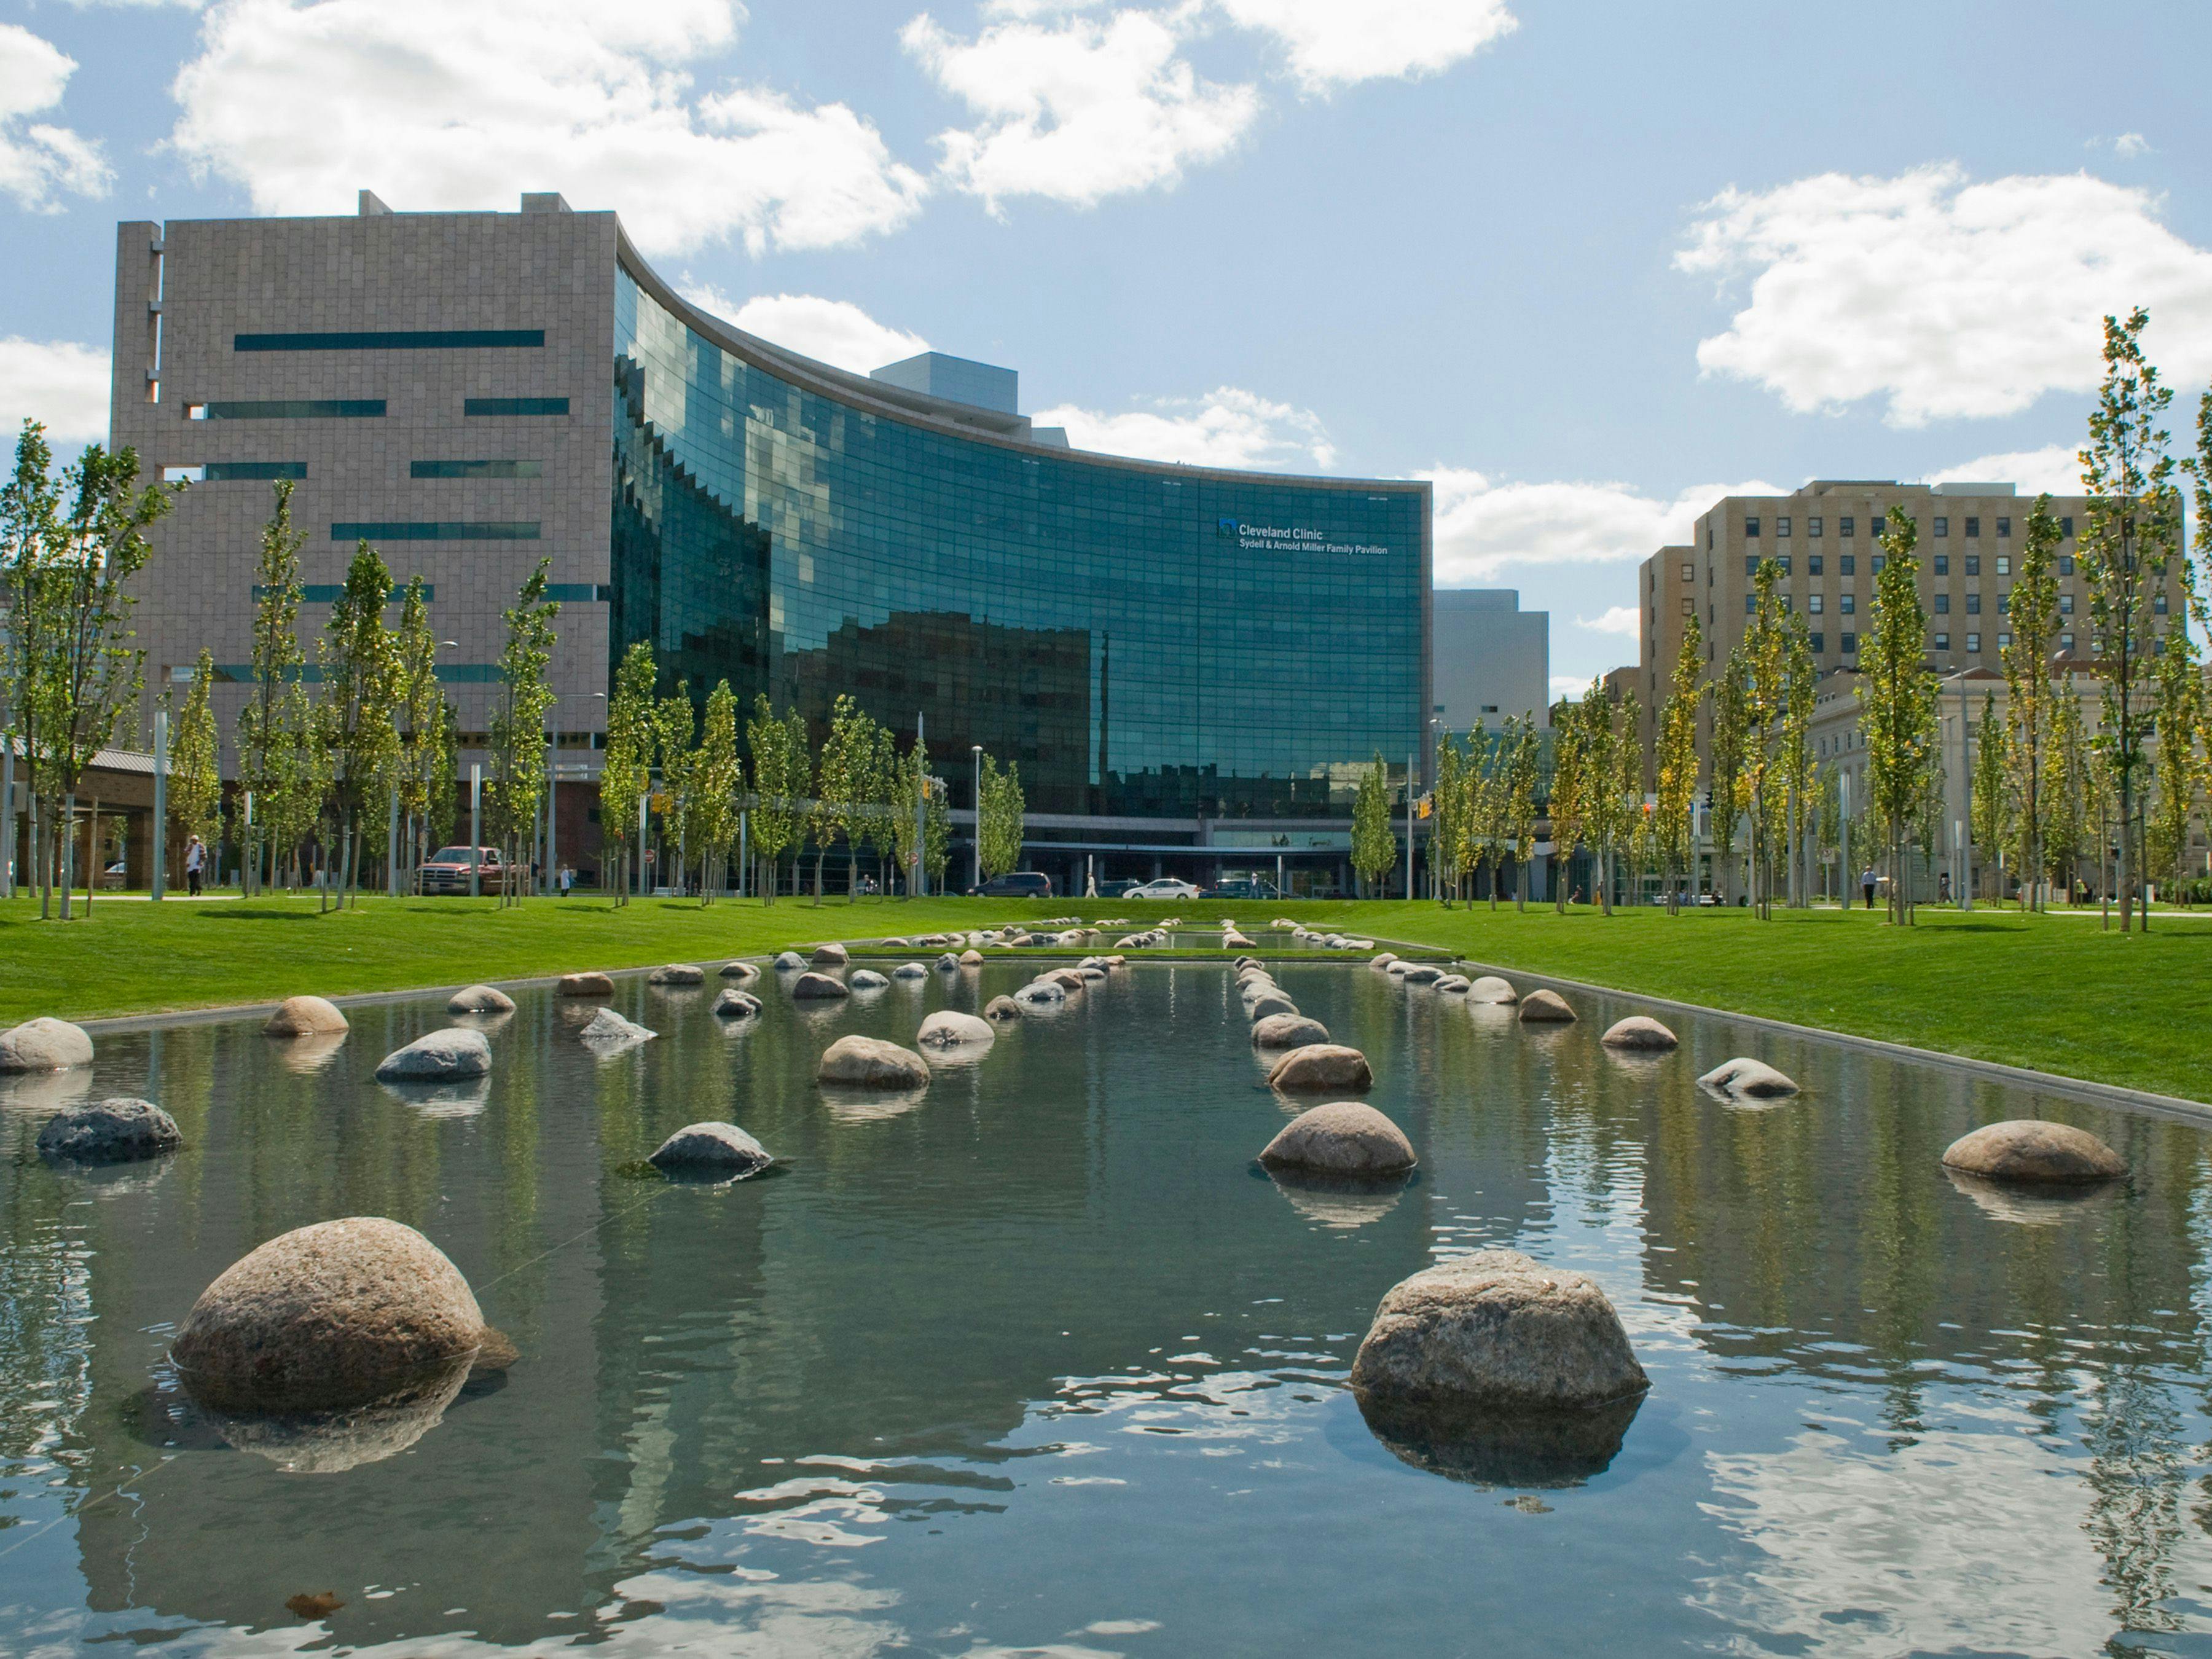 After record year, Cleveland Clinic has big plans for 2022